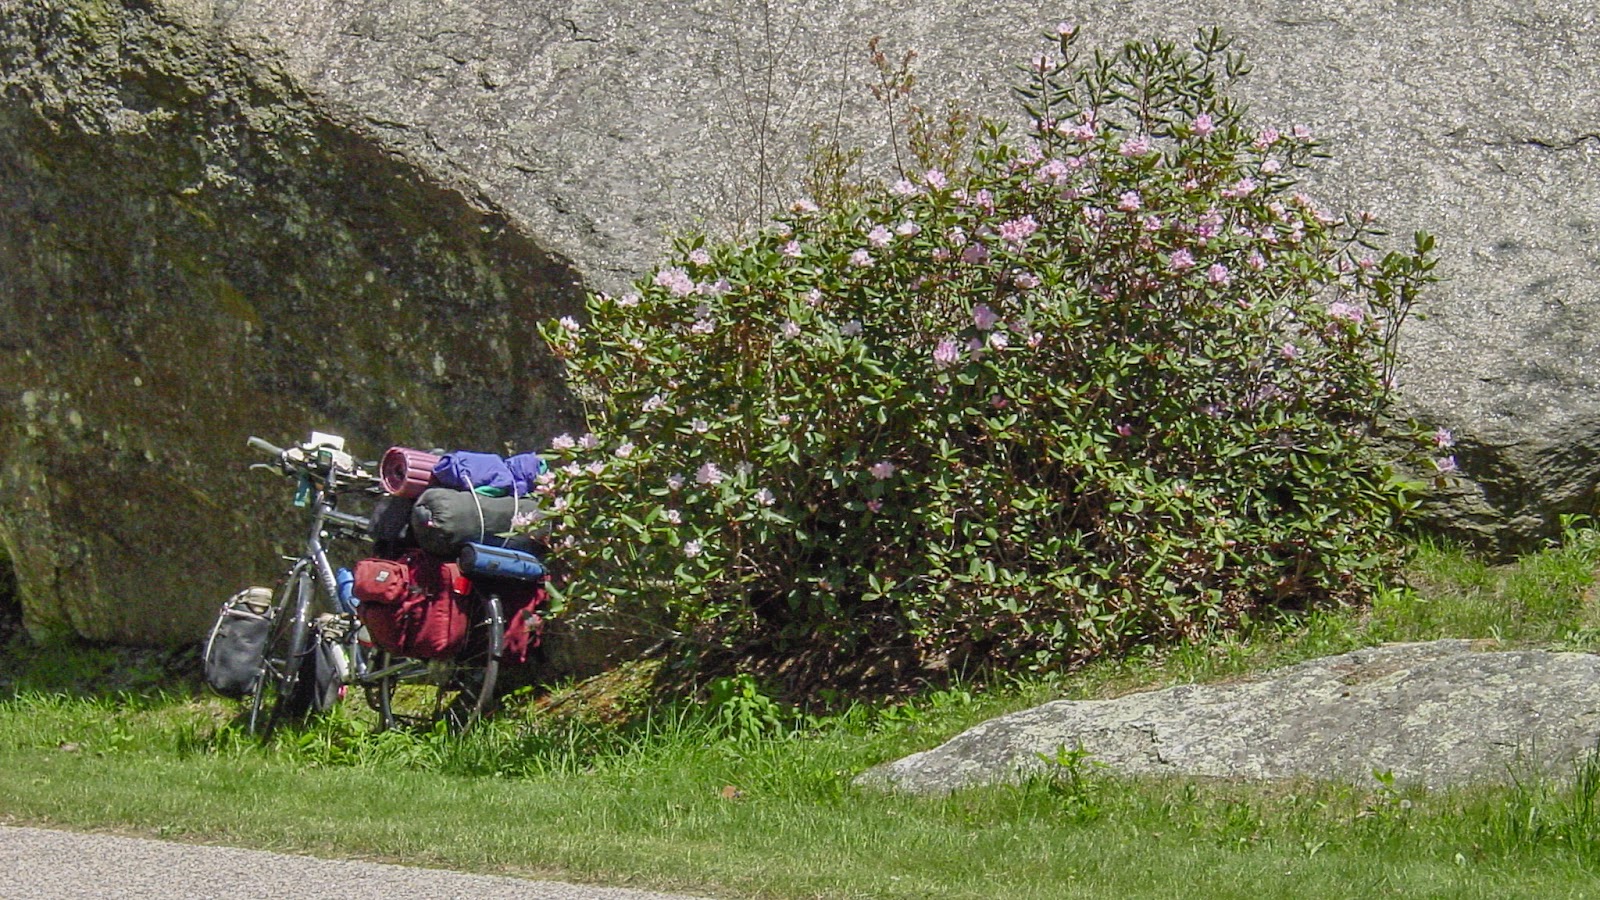 Bicycle leans on a flower bush.